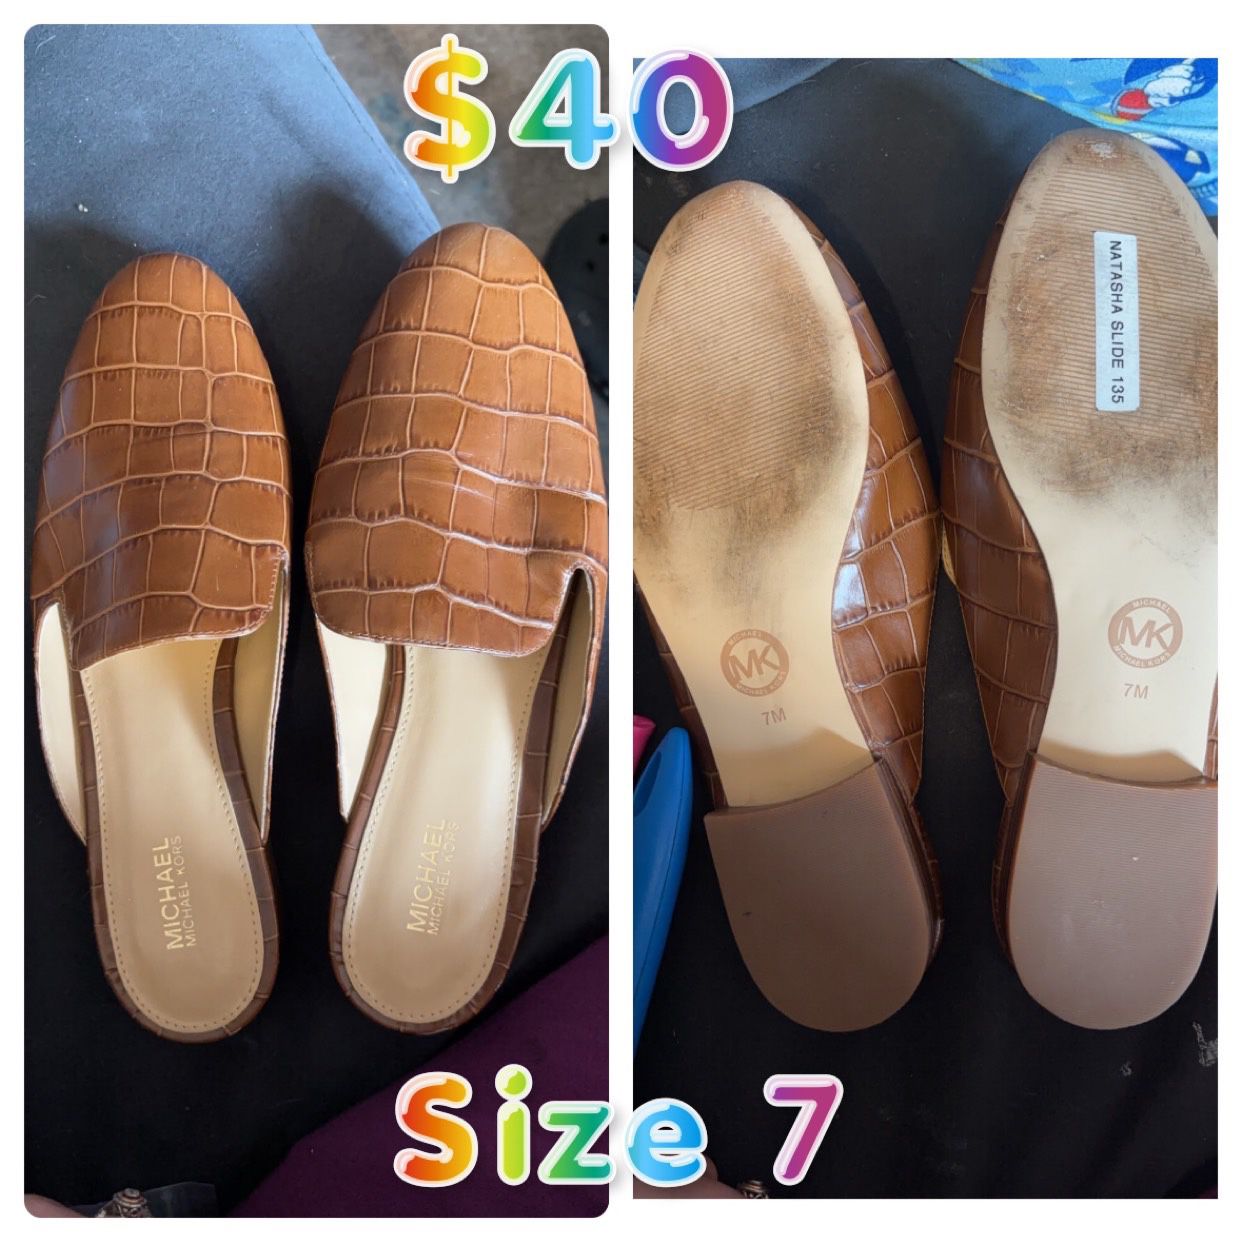 Woman’s Ugg Moccasins And MK Flats